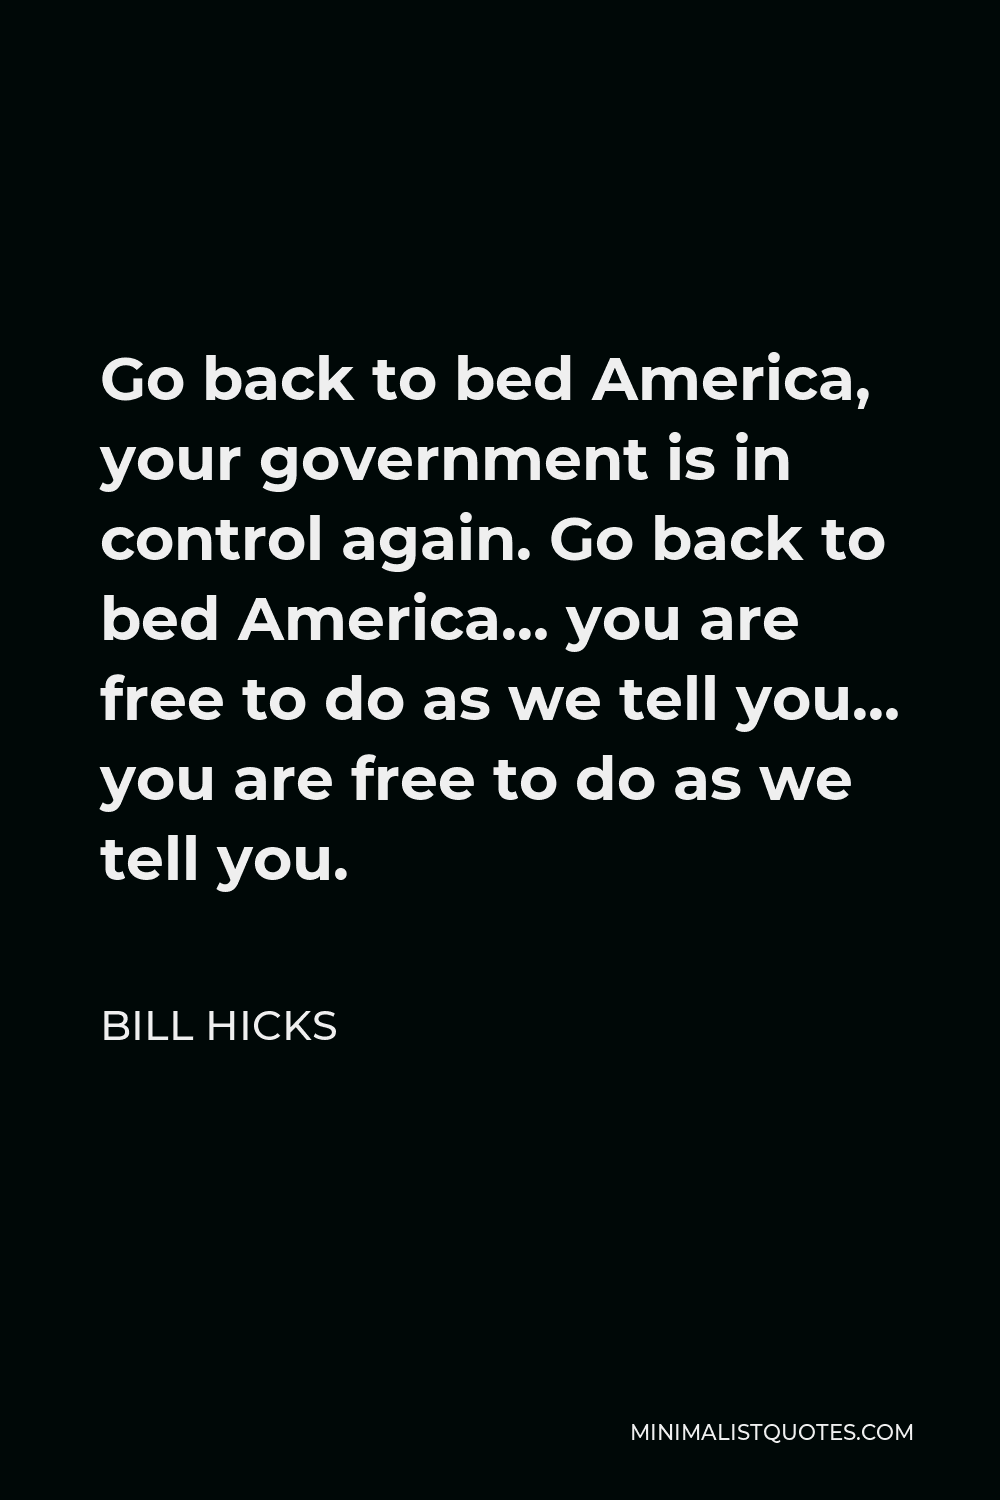 Bill Hicks Quote - Go back to bed America, your government is in control again. Go back to bed America… you are free to do as we tell you… you are free to do as we tell you.